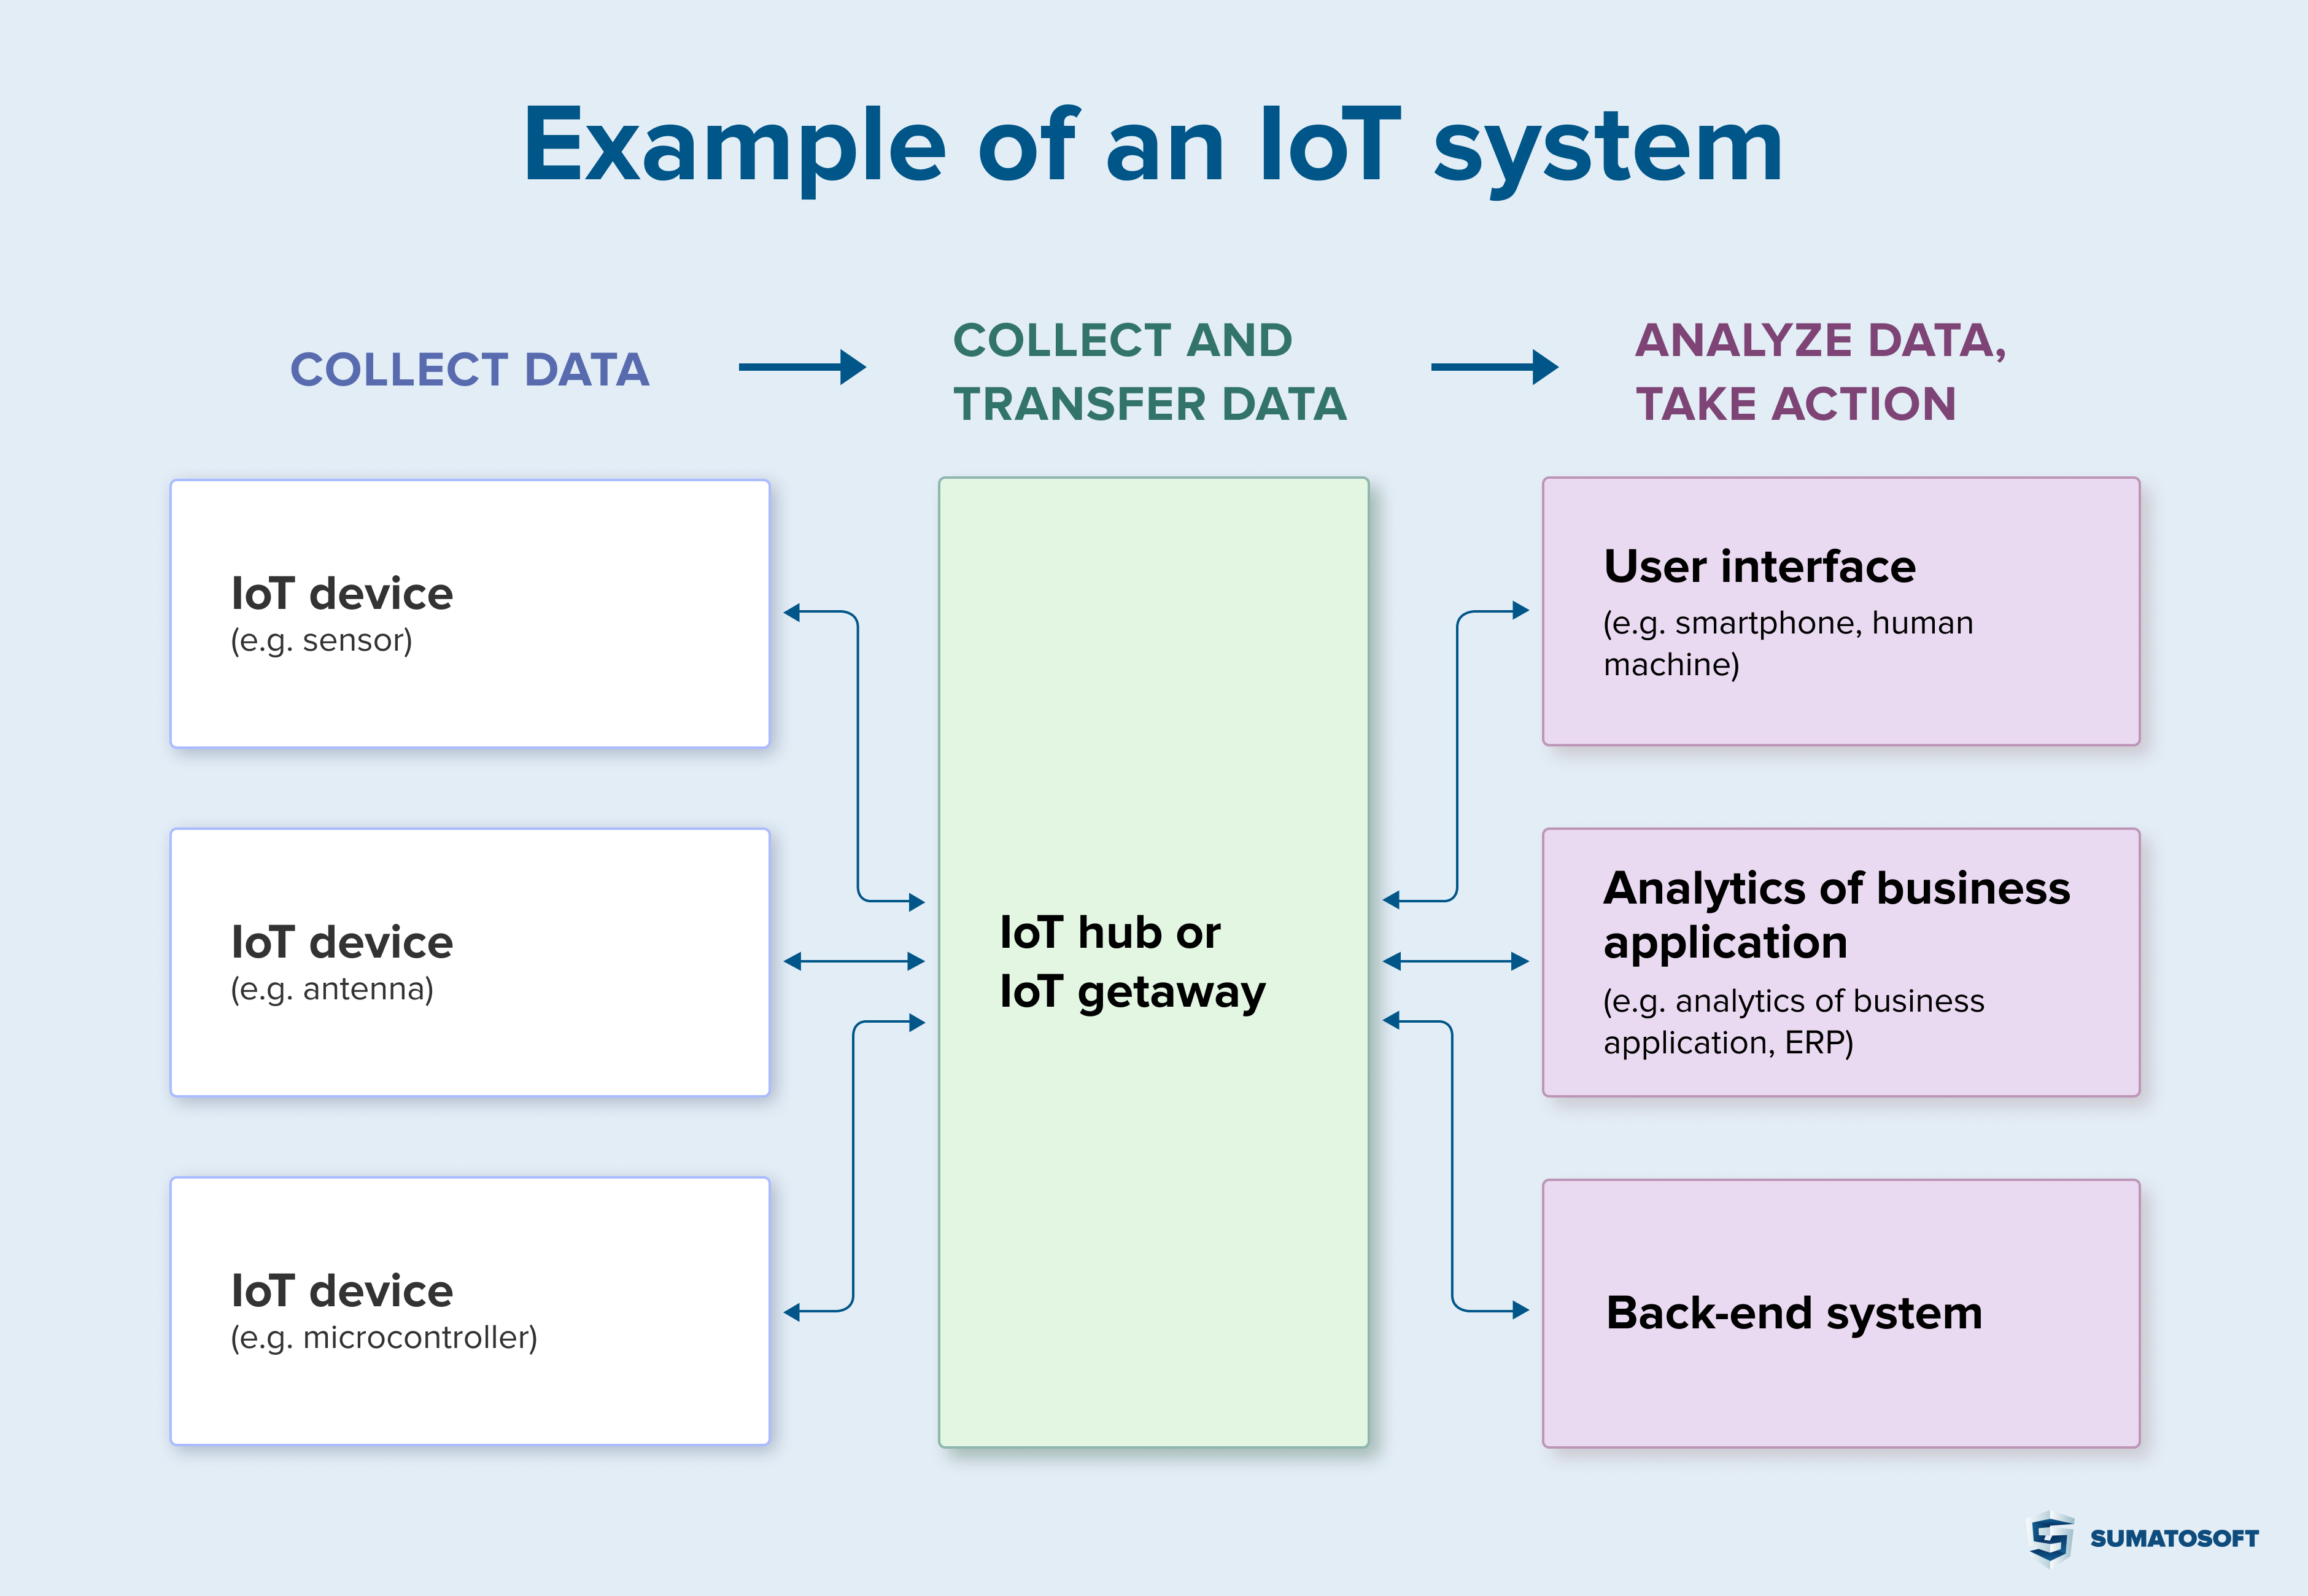 examples of an IoT systems